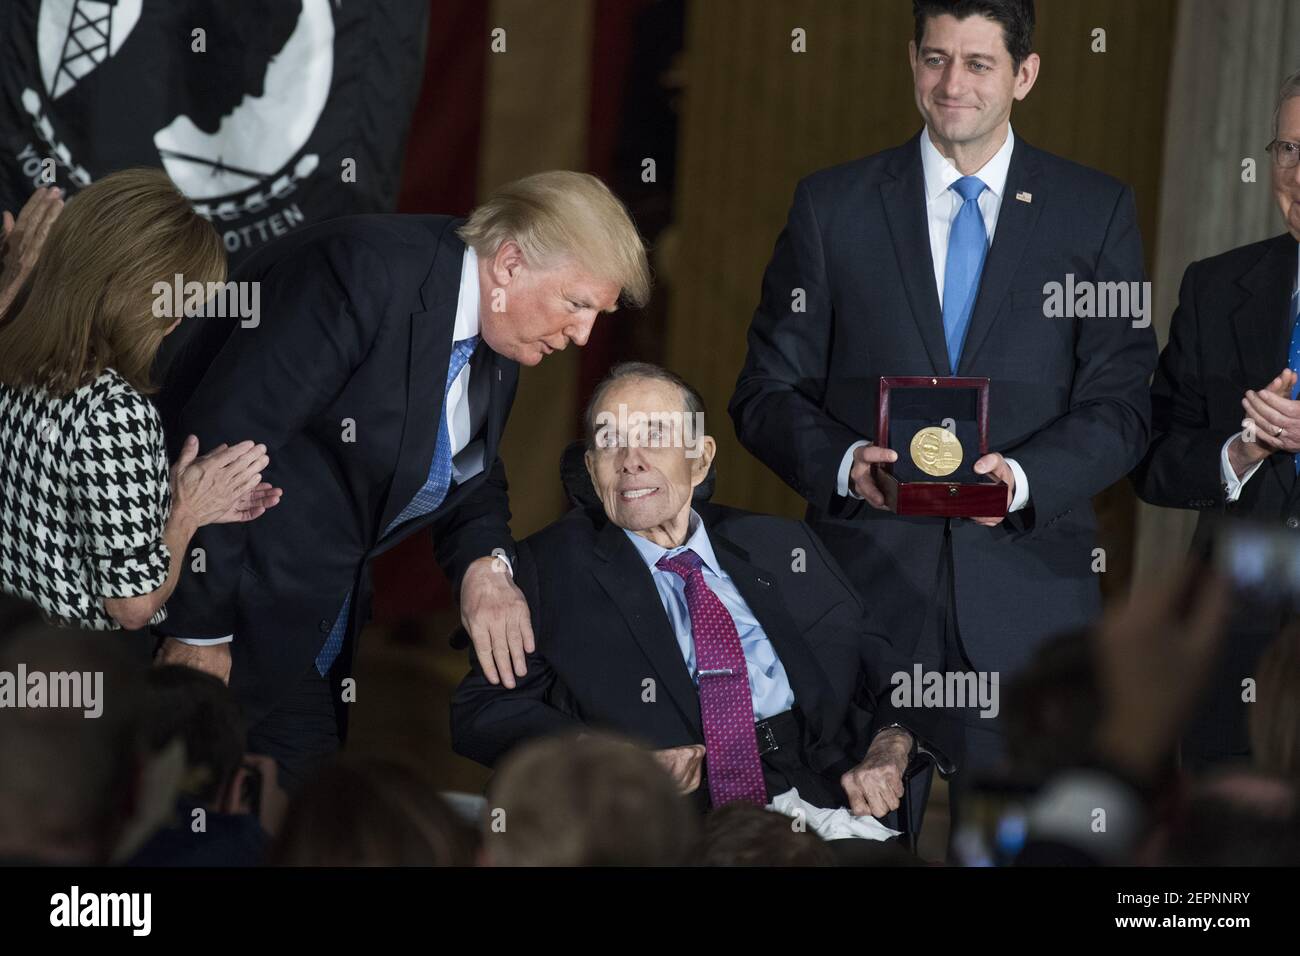 UNITED STATES - JANUARY 17: President Donald Trump, congratulates Sen. Bob Dole, R-Kan., seated, as Speaker Paul Ryan, R-Wis., presents a Congressional Gold Medal to Dole in the Capitol rotunda to honor him as a "soldier, legislator, and statesman," on January 17, 2018. (Photo By Tom Williams/CQ Roll Call) Stock Photo